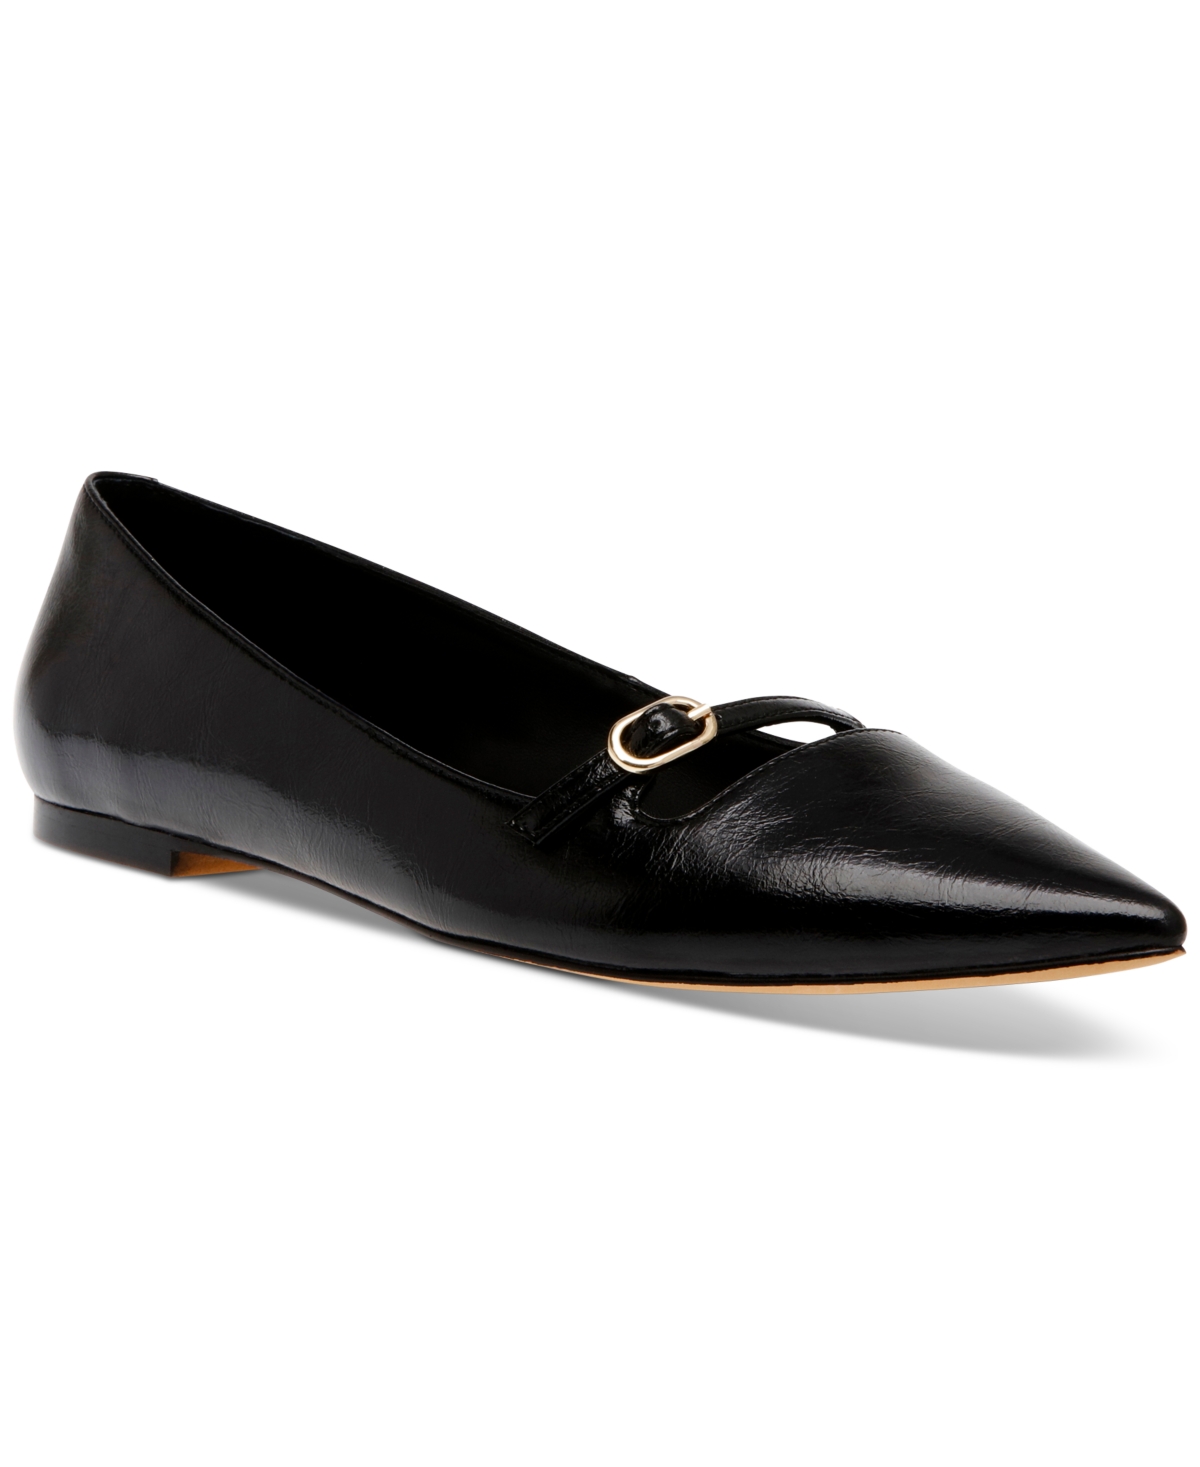 Women's Luvey Pointed-Toe Strapped Flats - Black Leather